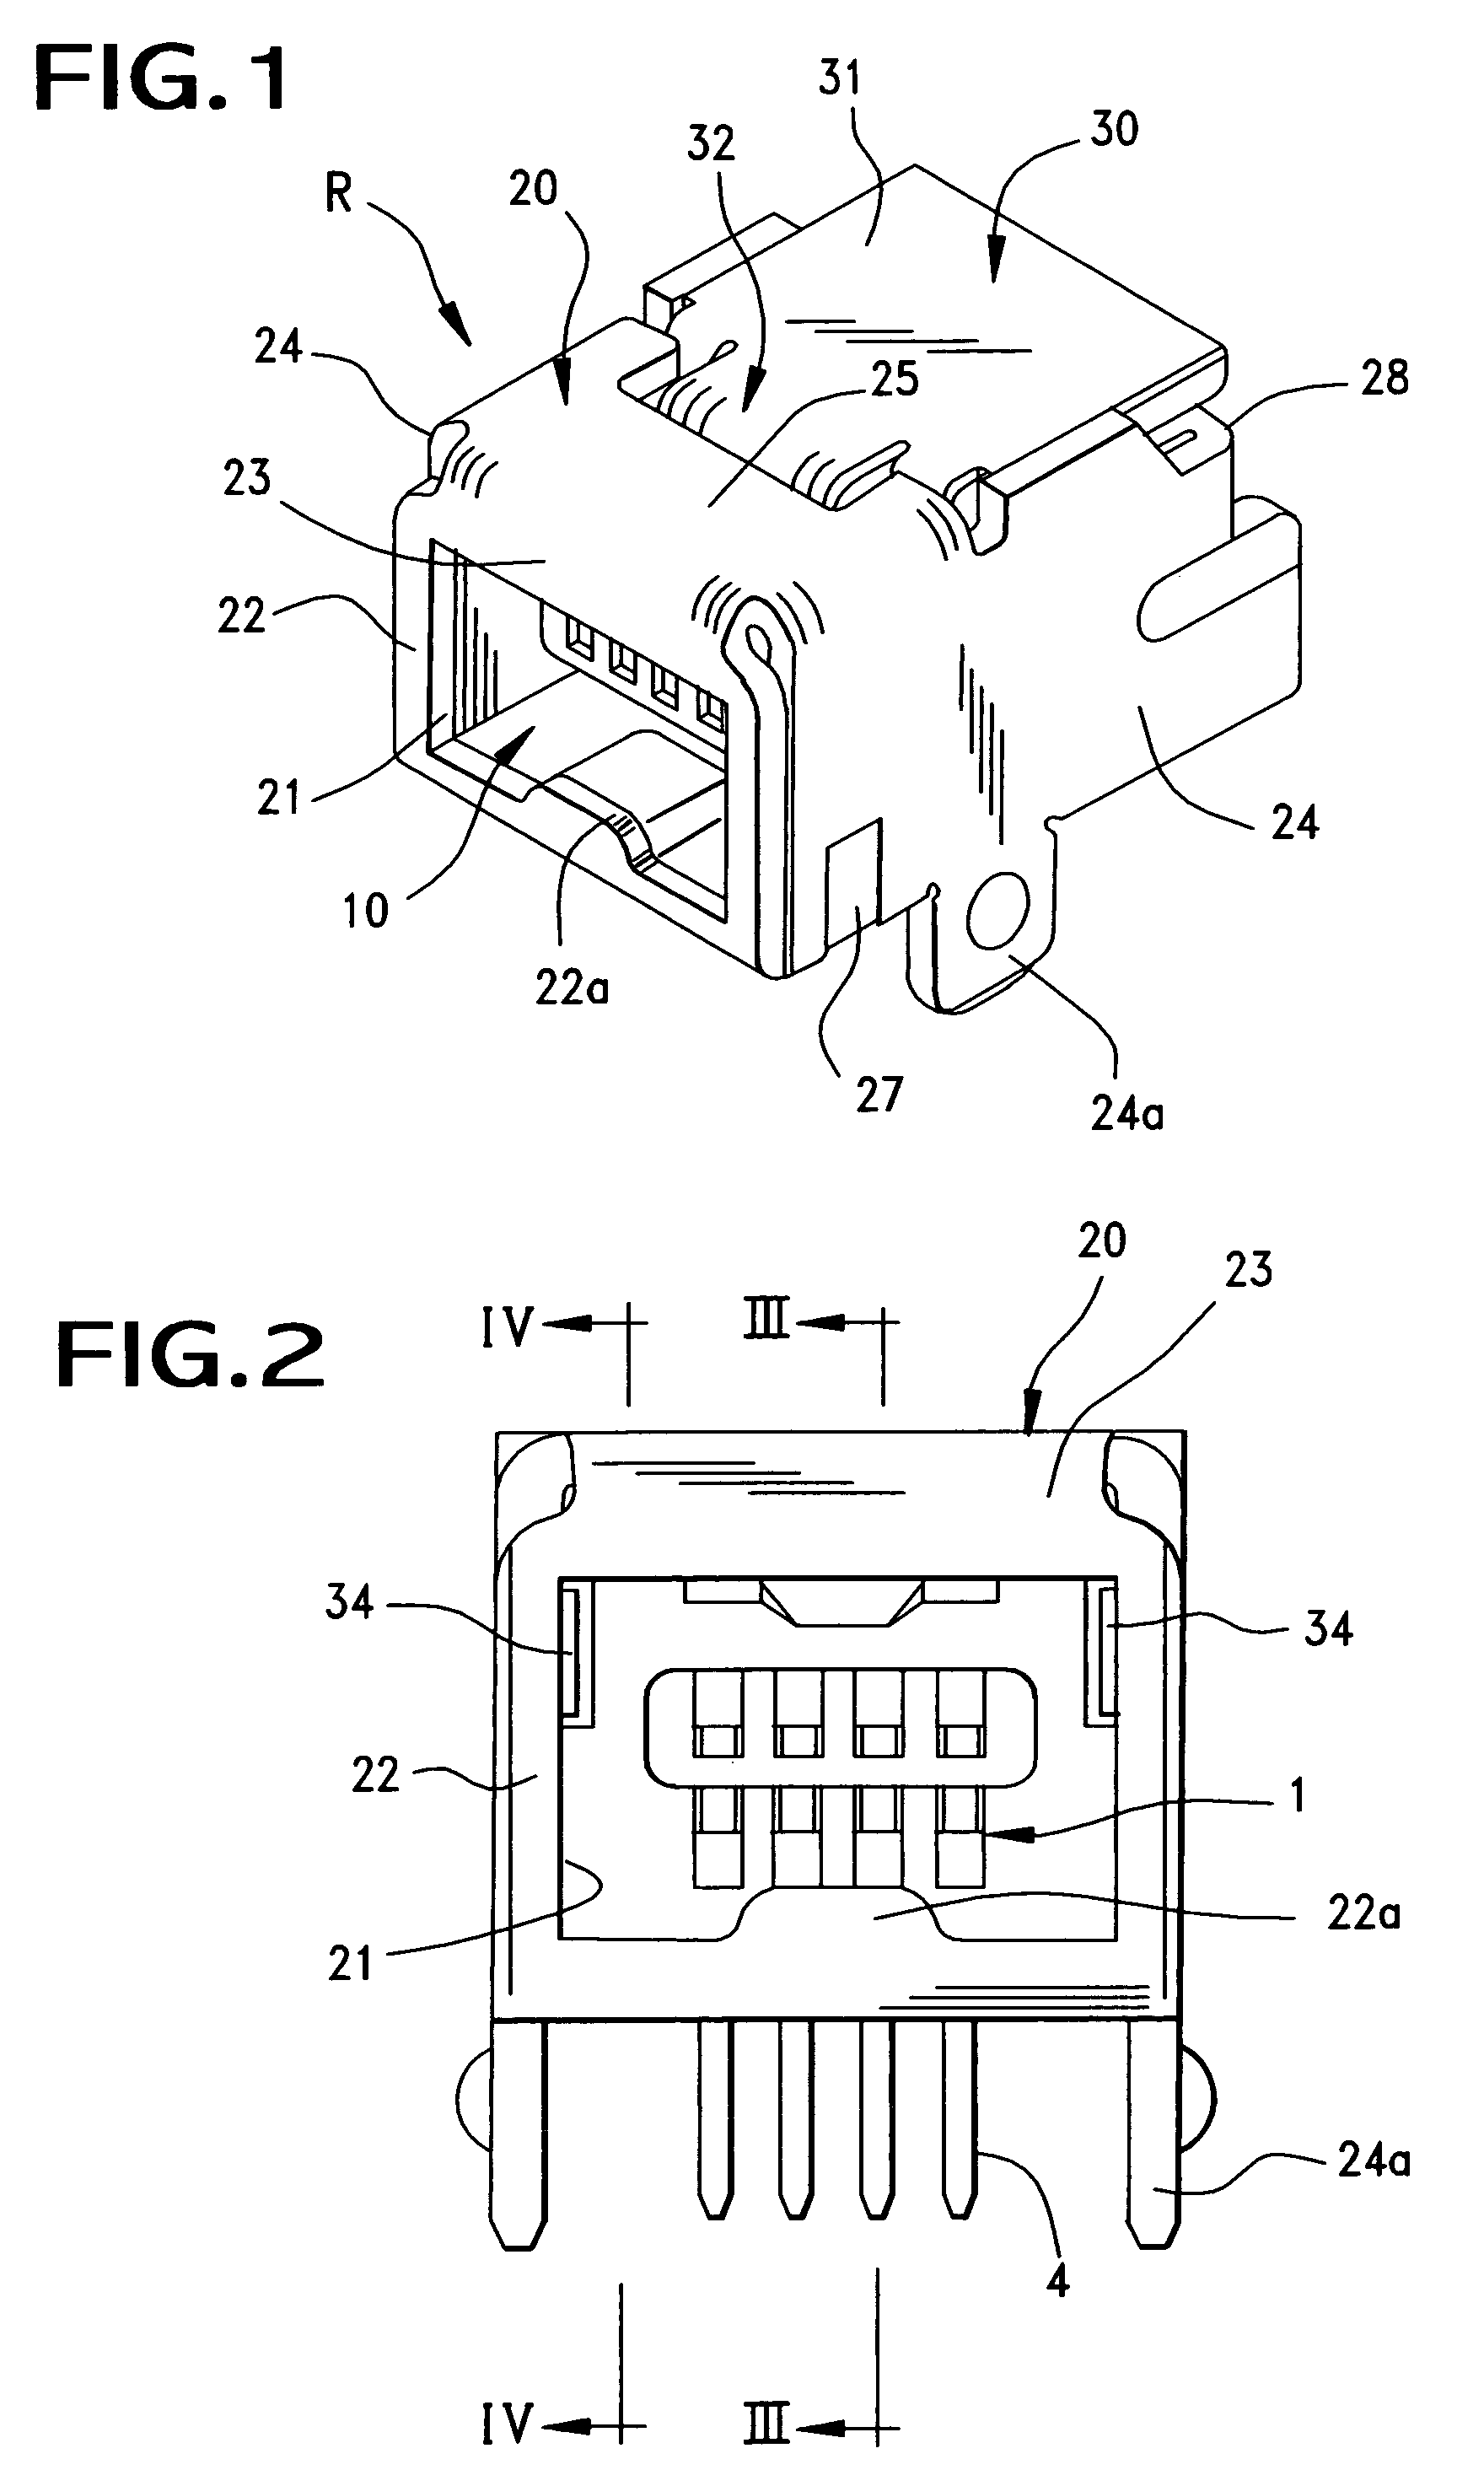 Shielded connector of reduced-size with improved retention characteristics